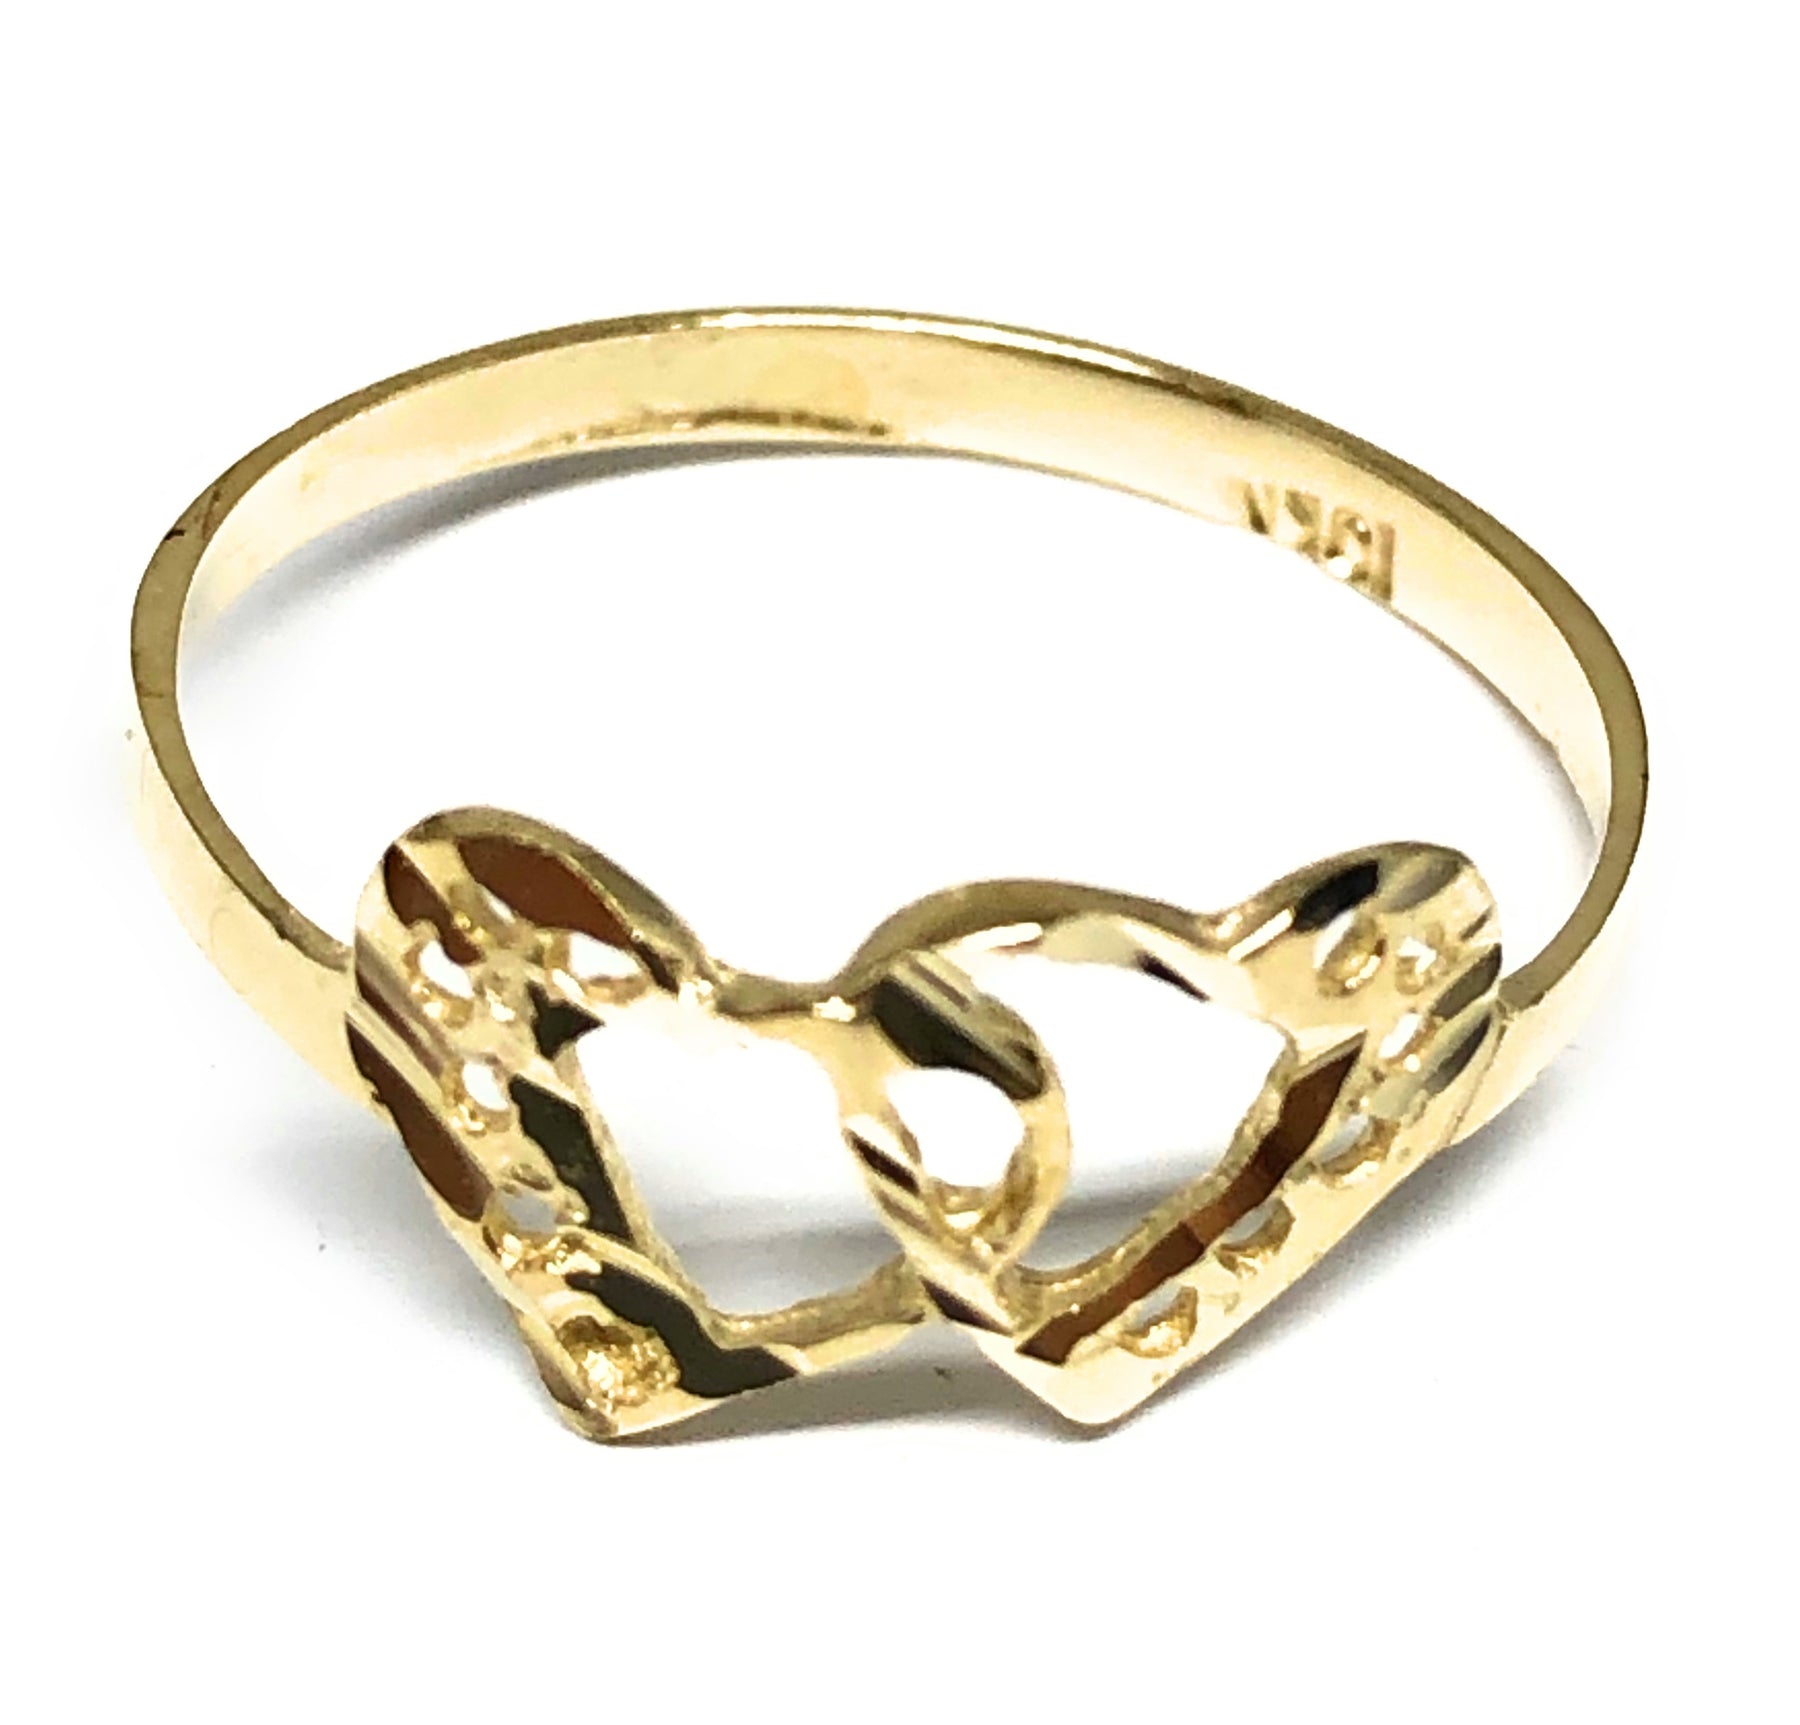 DOUBLE HEART RING 14K SOLID YELLOW GOLD * NEW WITH TAG * Made in USA | eBay